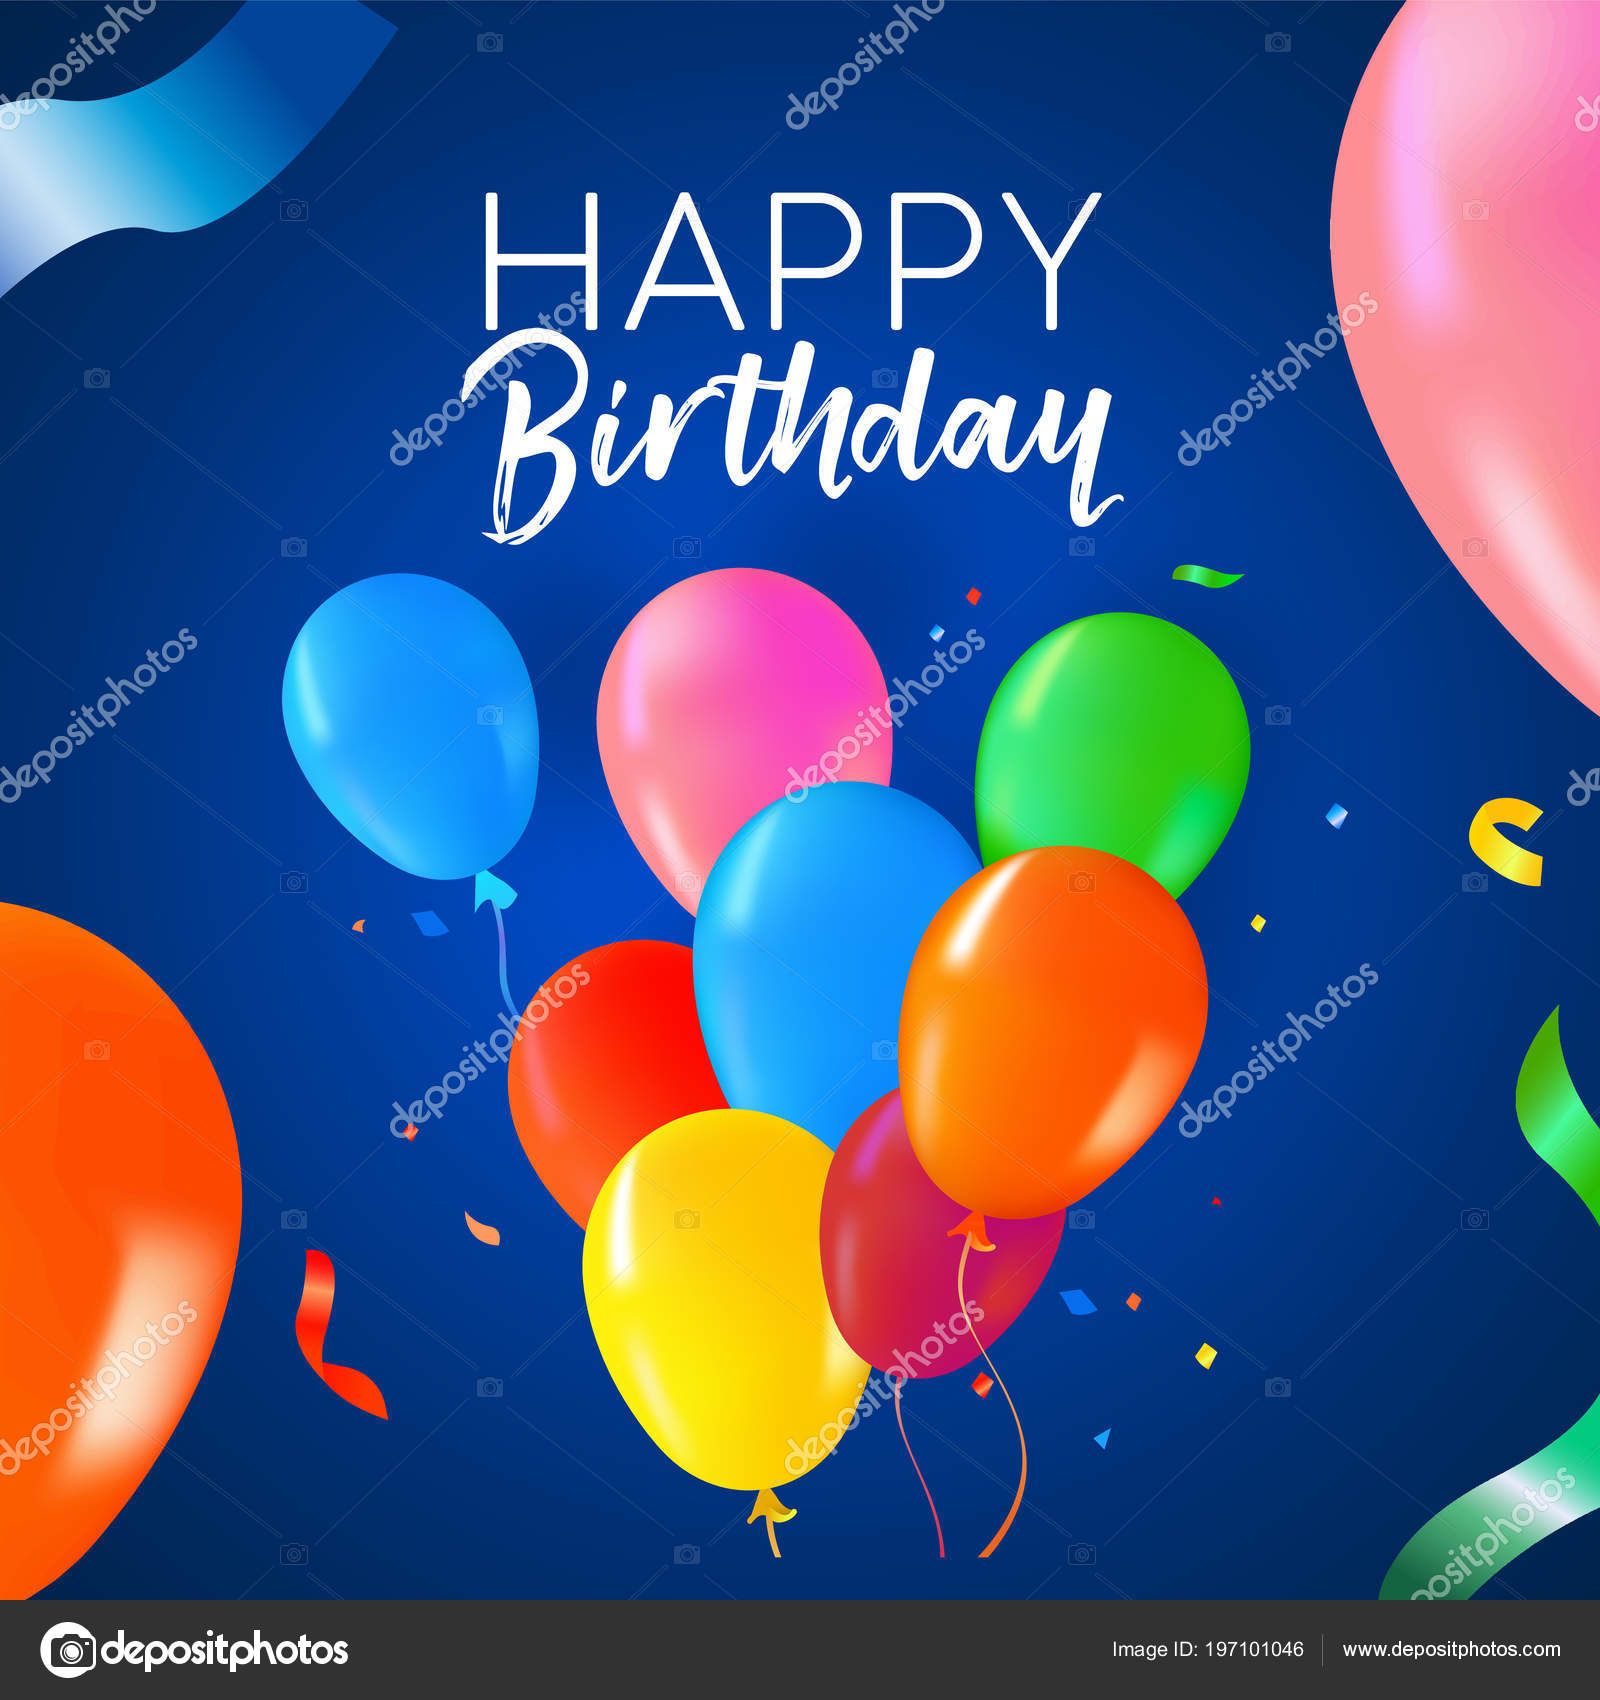 Happy Birthday Greeting Card Design Fun Party Balloons Confetti Decoration Vector Image By C Cienpies Vector Stock 197101046